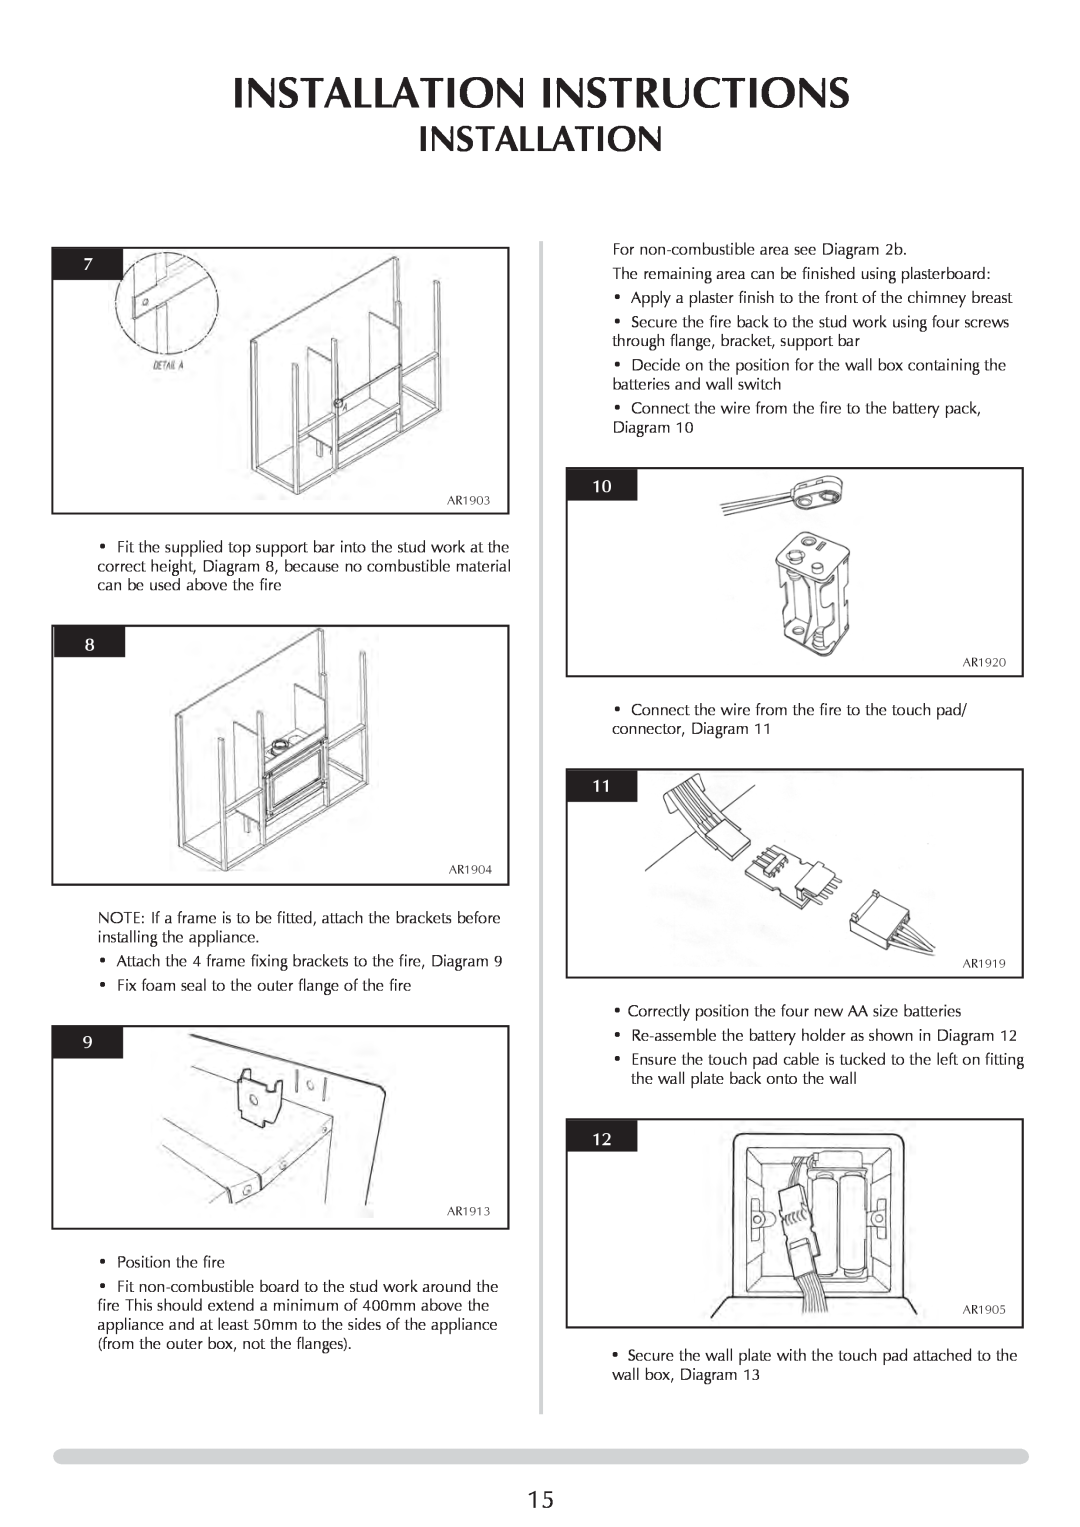 Stovax P8701CFCHEC, P8700CFCHEC manual Installation Instructions, Fix foam seal to the outer flange of the fire 